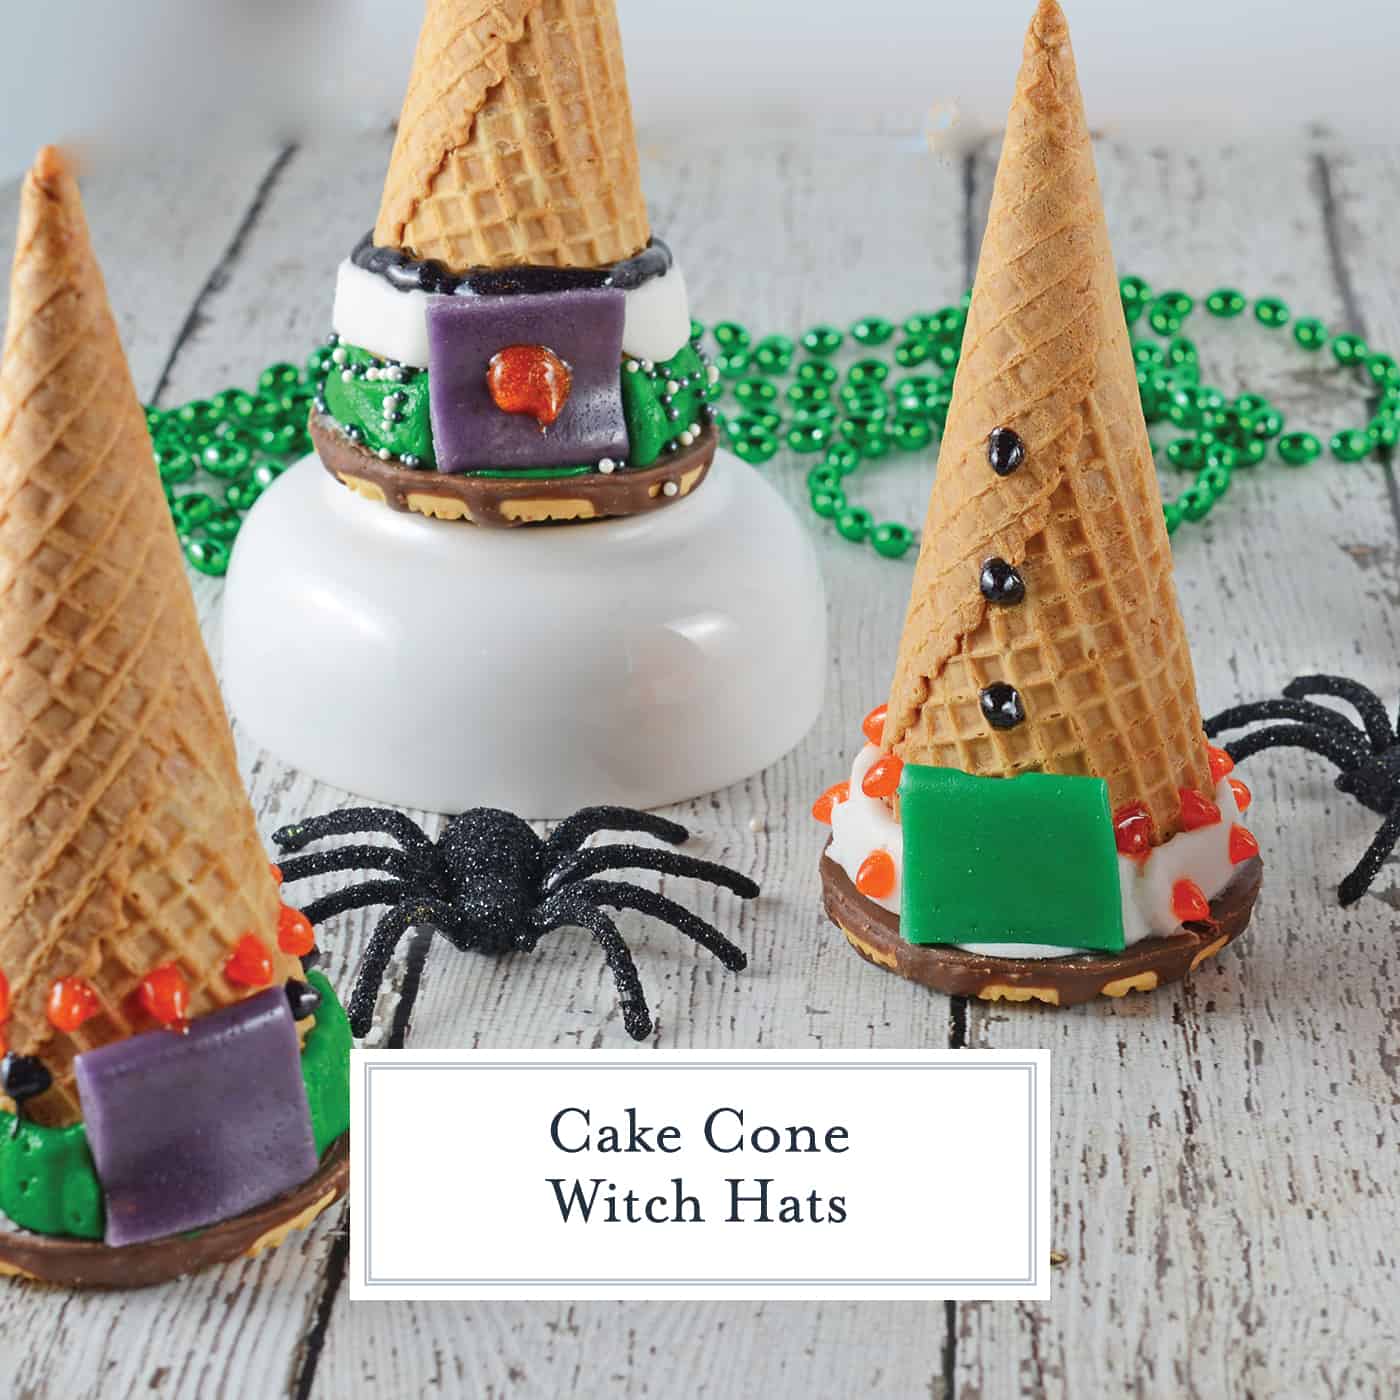 Cake Cone Witch Hats are the perfect halloween activity for kids! Bake cake into a waffle cone, cap it with a cookie, and let them decorate their own treats! #cakecone #icecreamcakecone #halloweentreats www.savoryexperiments.com